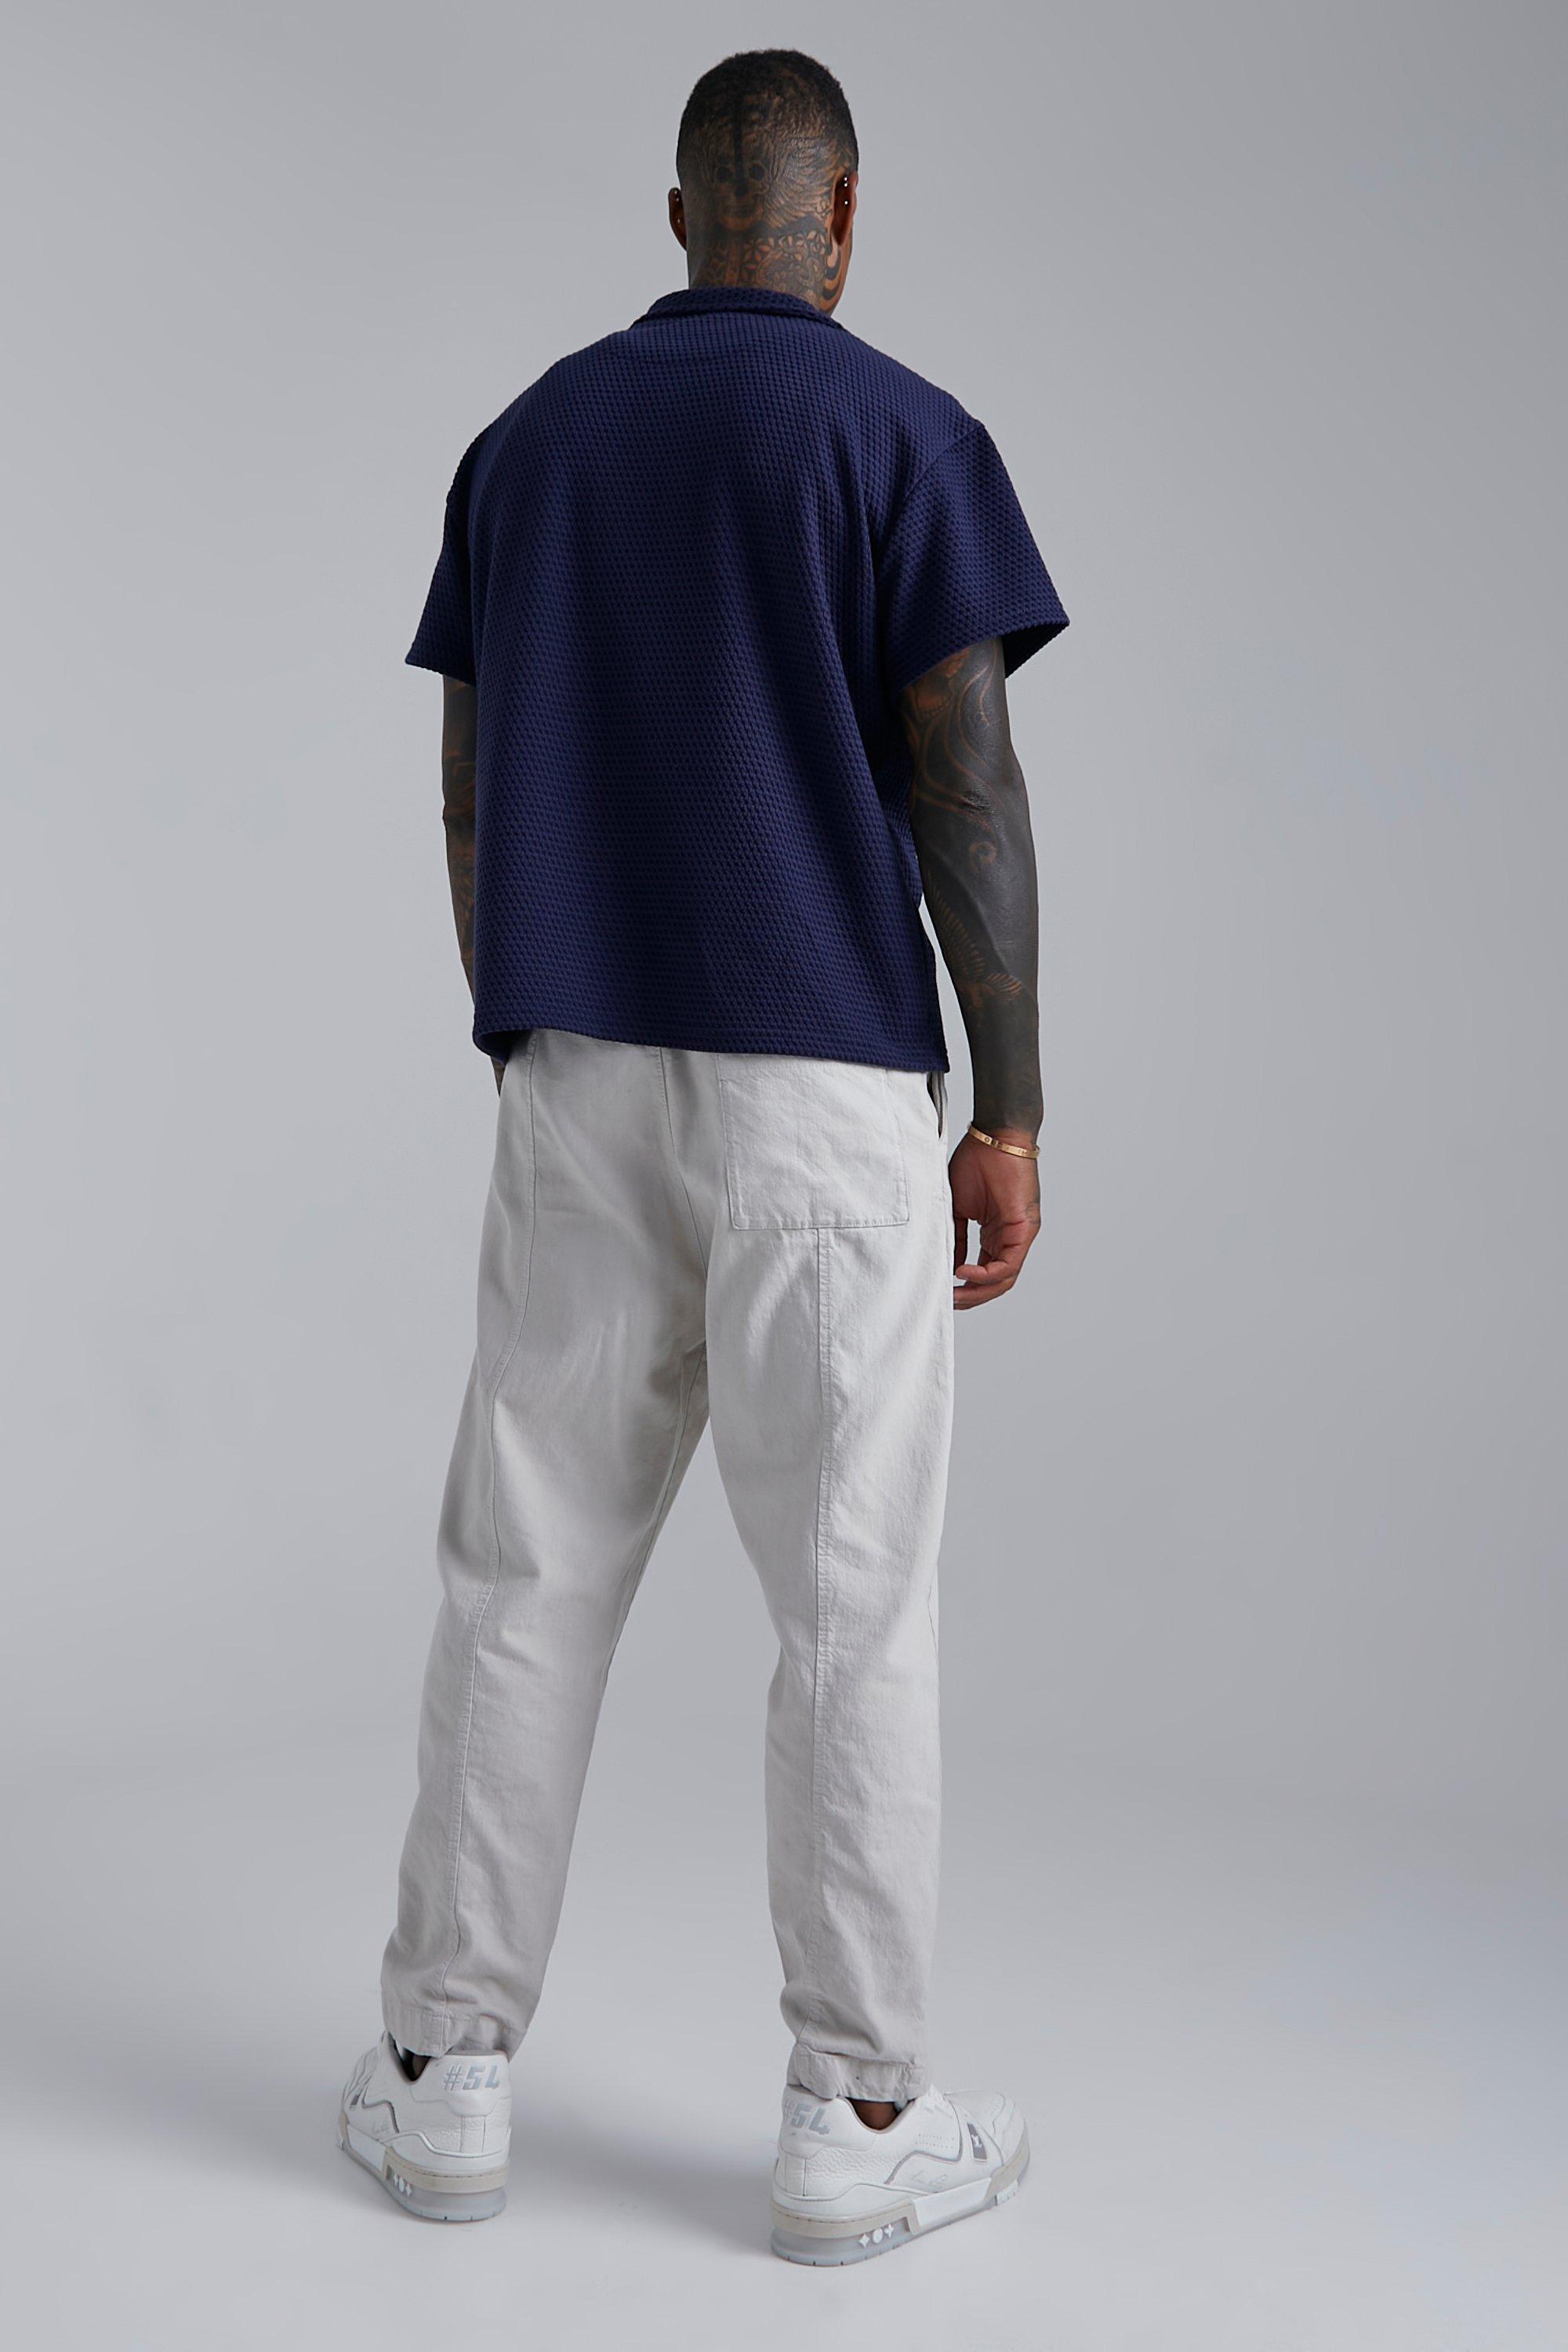 BoohooMAN Short Sleeve Boxy Textured Revere Shirt in Blue for Men | Lyst